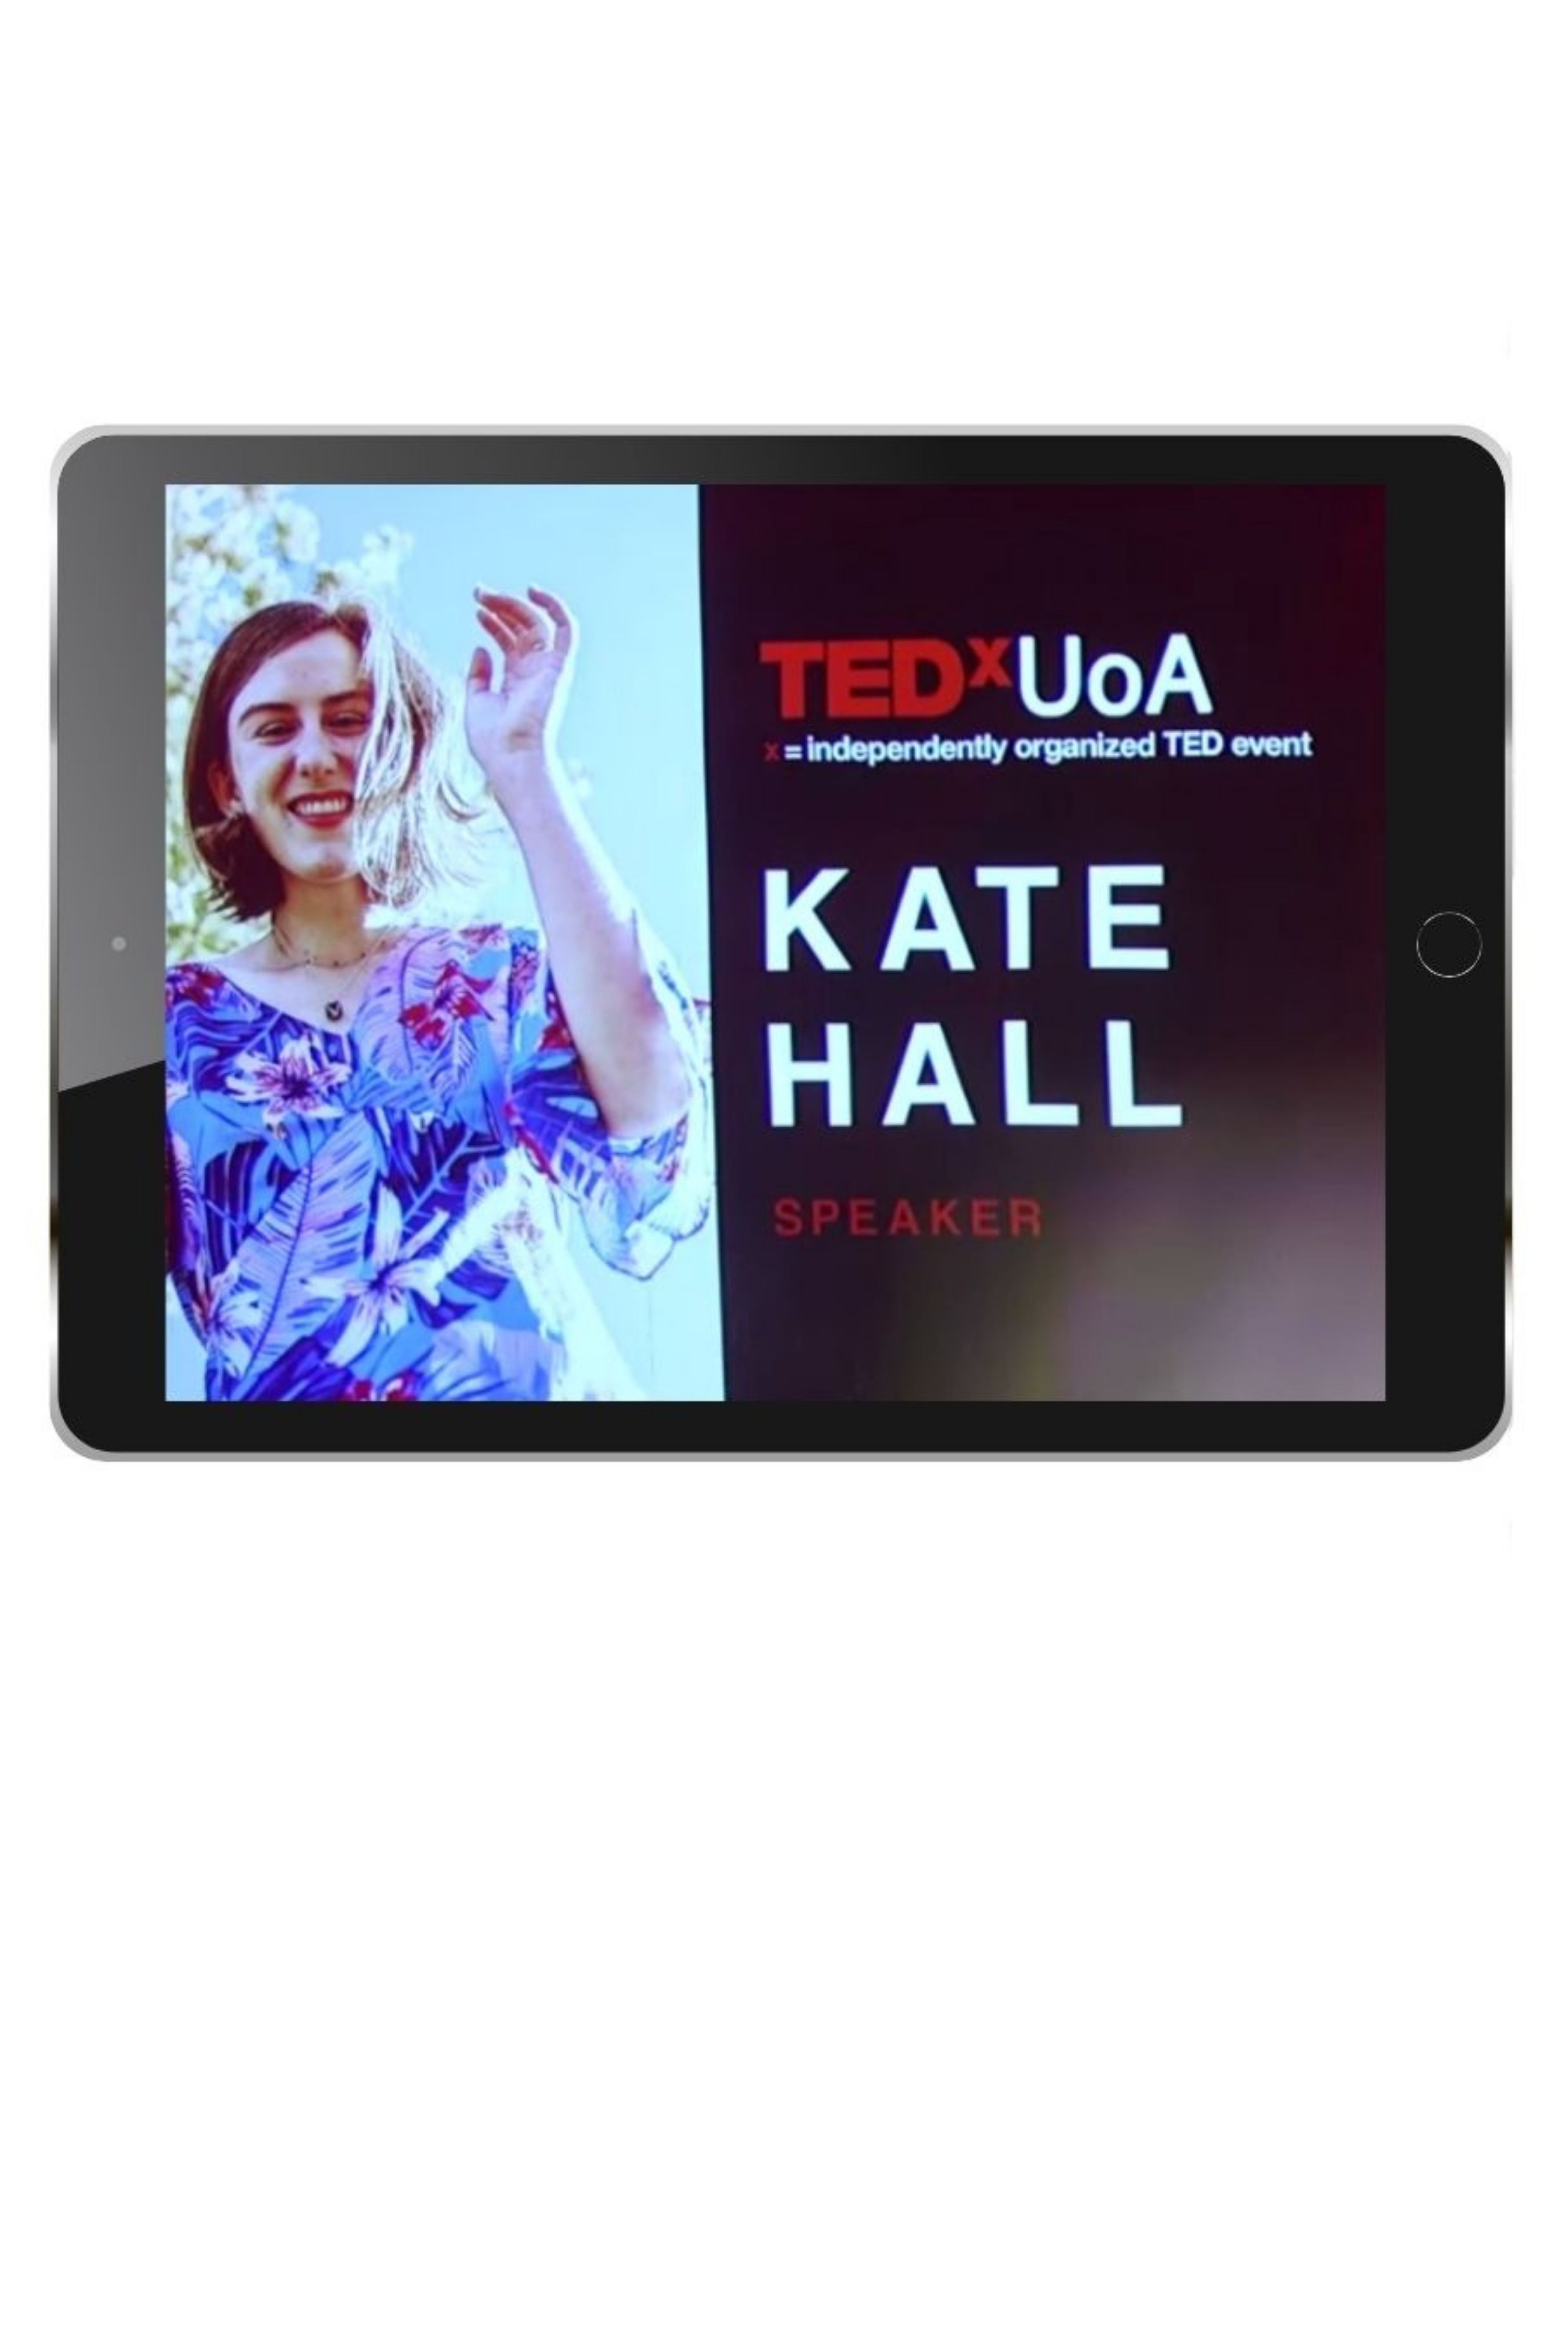 Kate Hall’s Ted Talk – How to be a conscious consumer